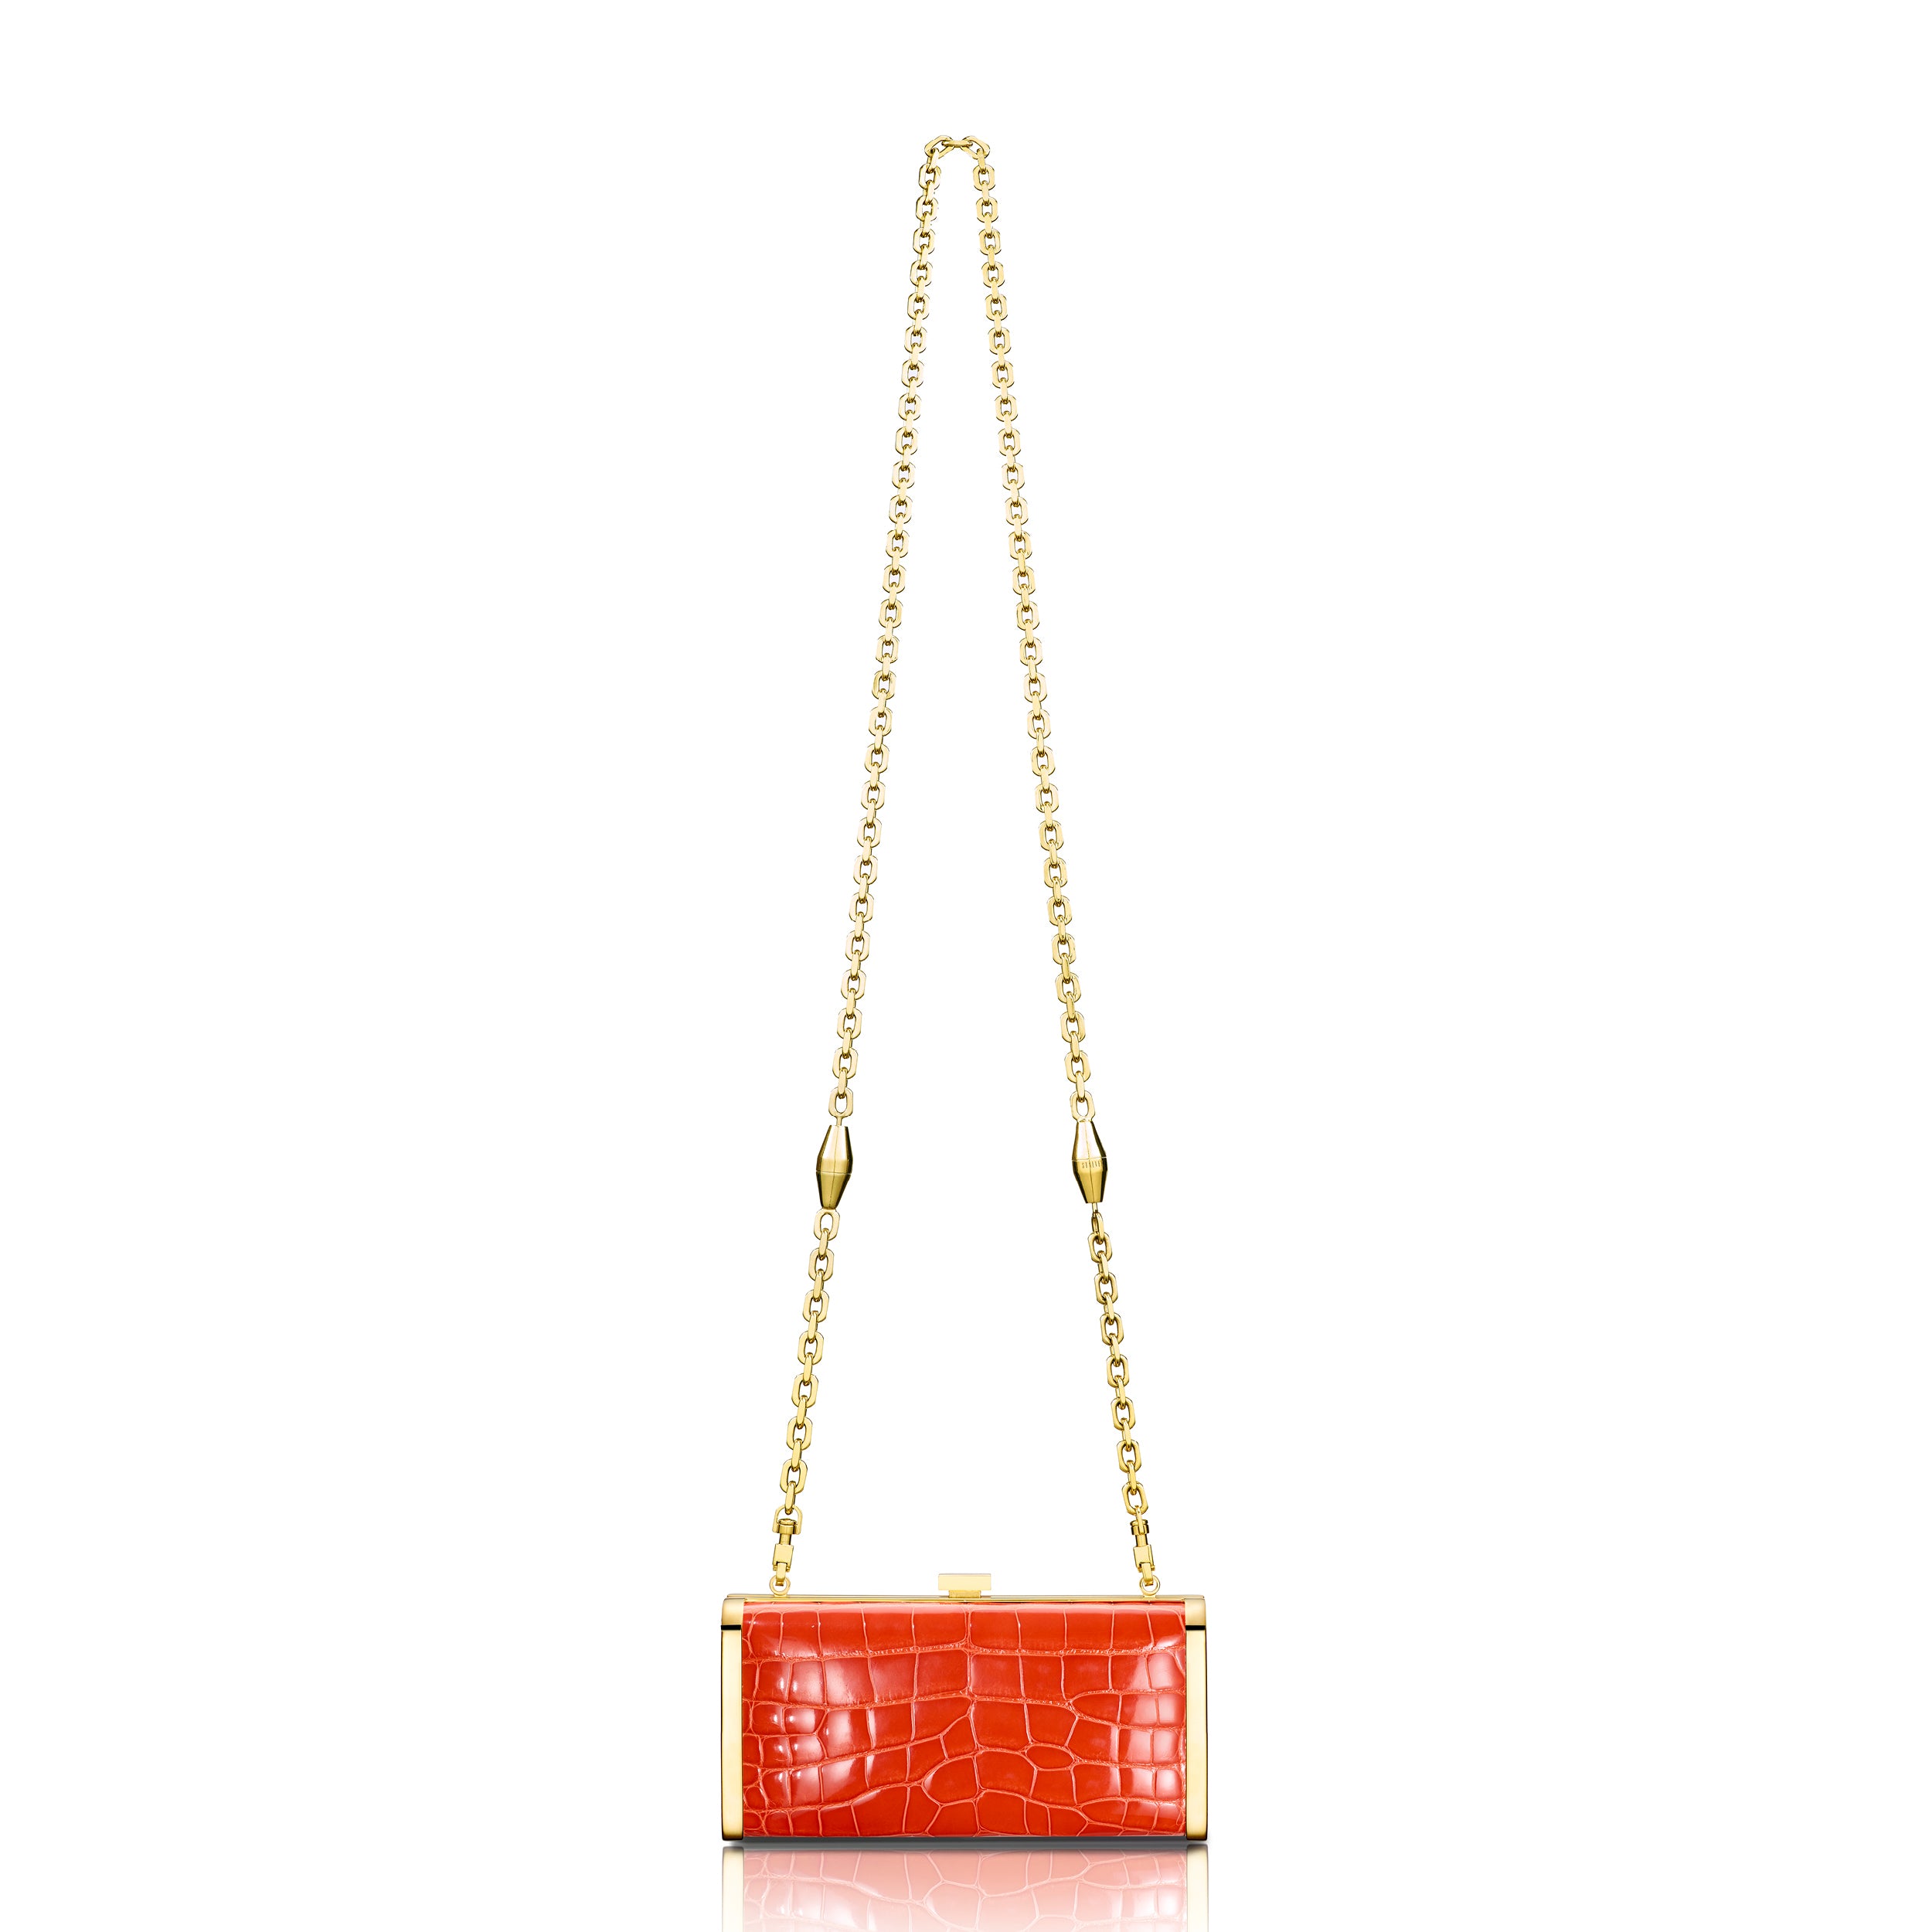 STALVEY Square Clutch in Orange Alligator with 24kt Gold Hardware Back View with Chain